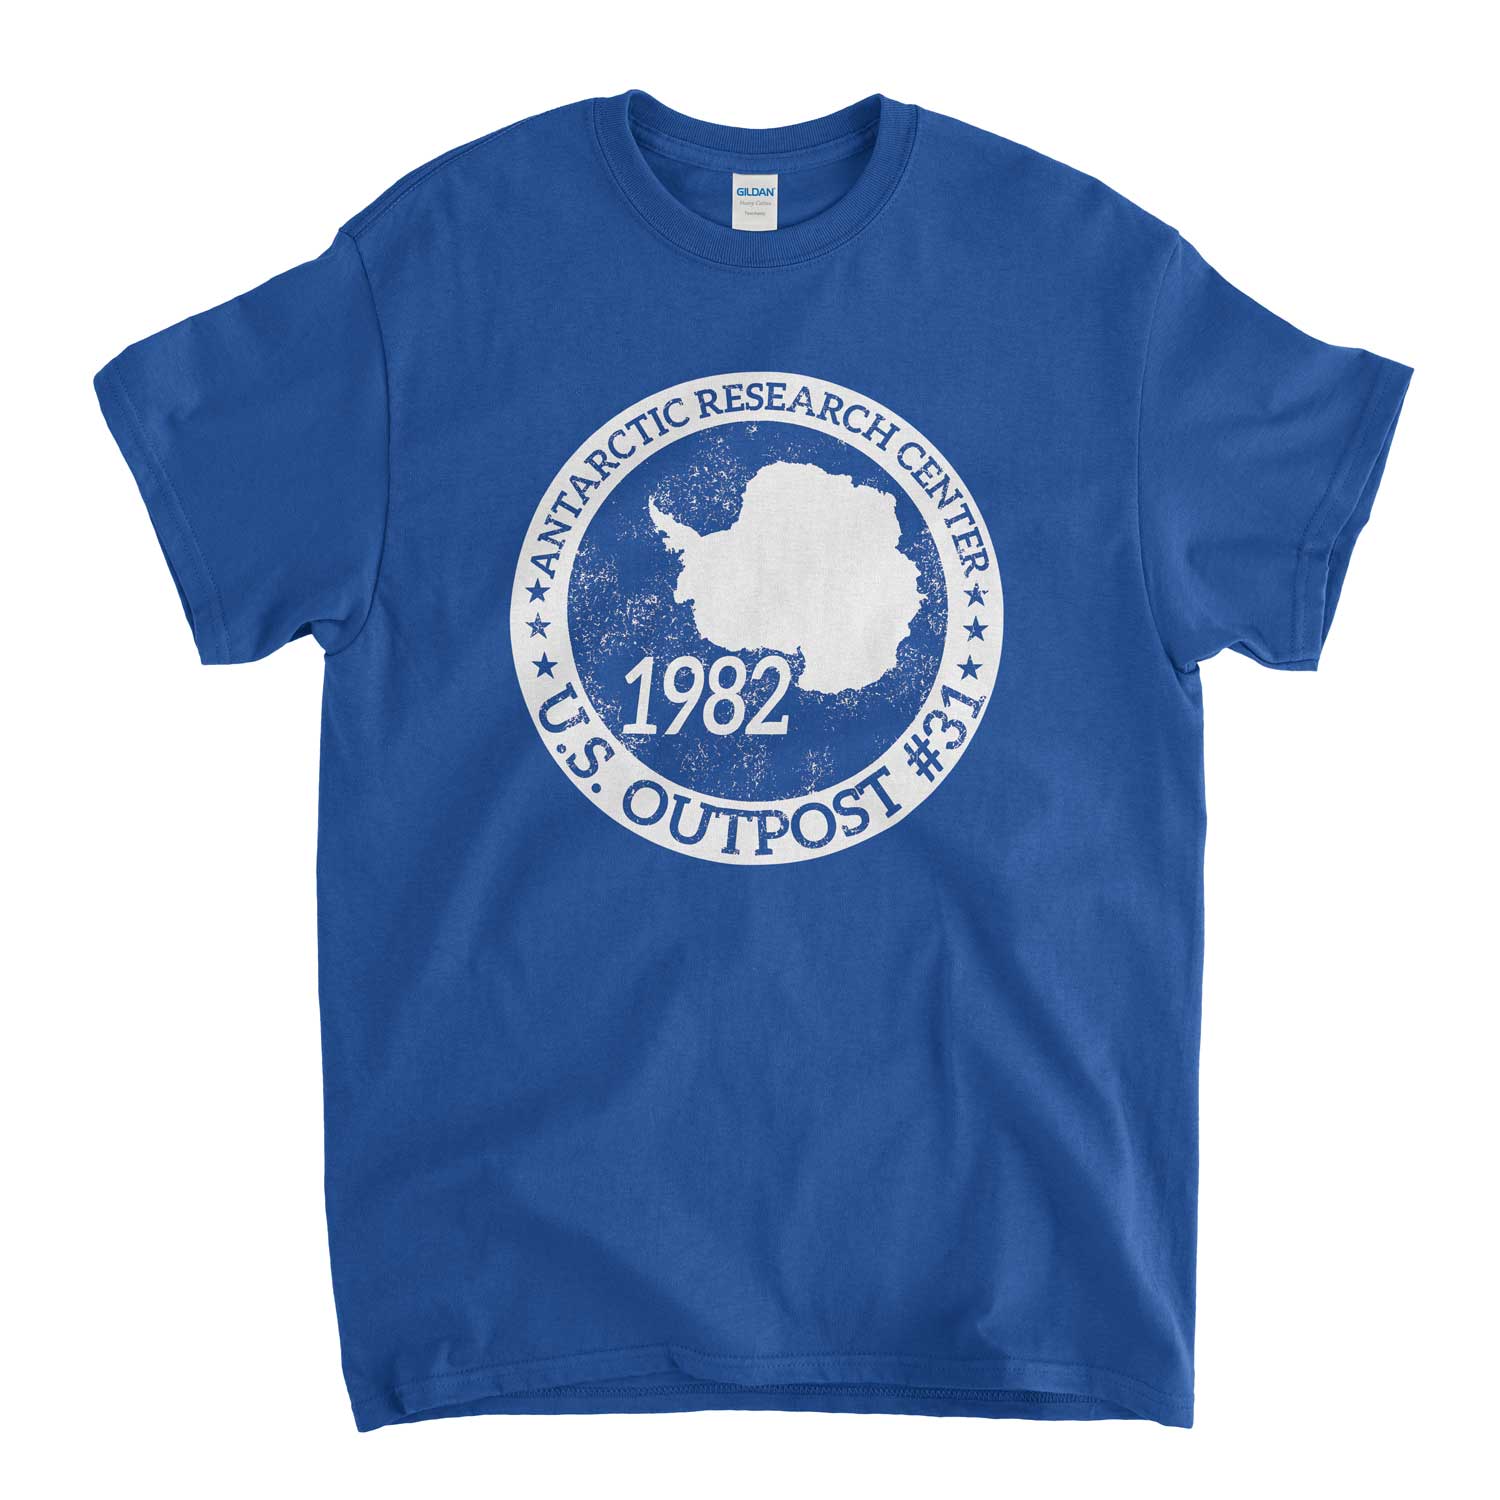 Inspired by The Thing T Shirt - US Outpost #31 Antarctica Research Station 1982